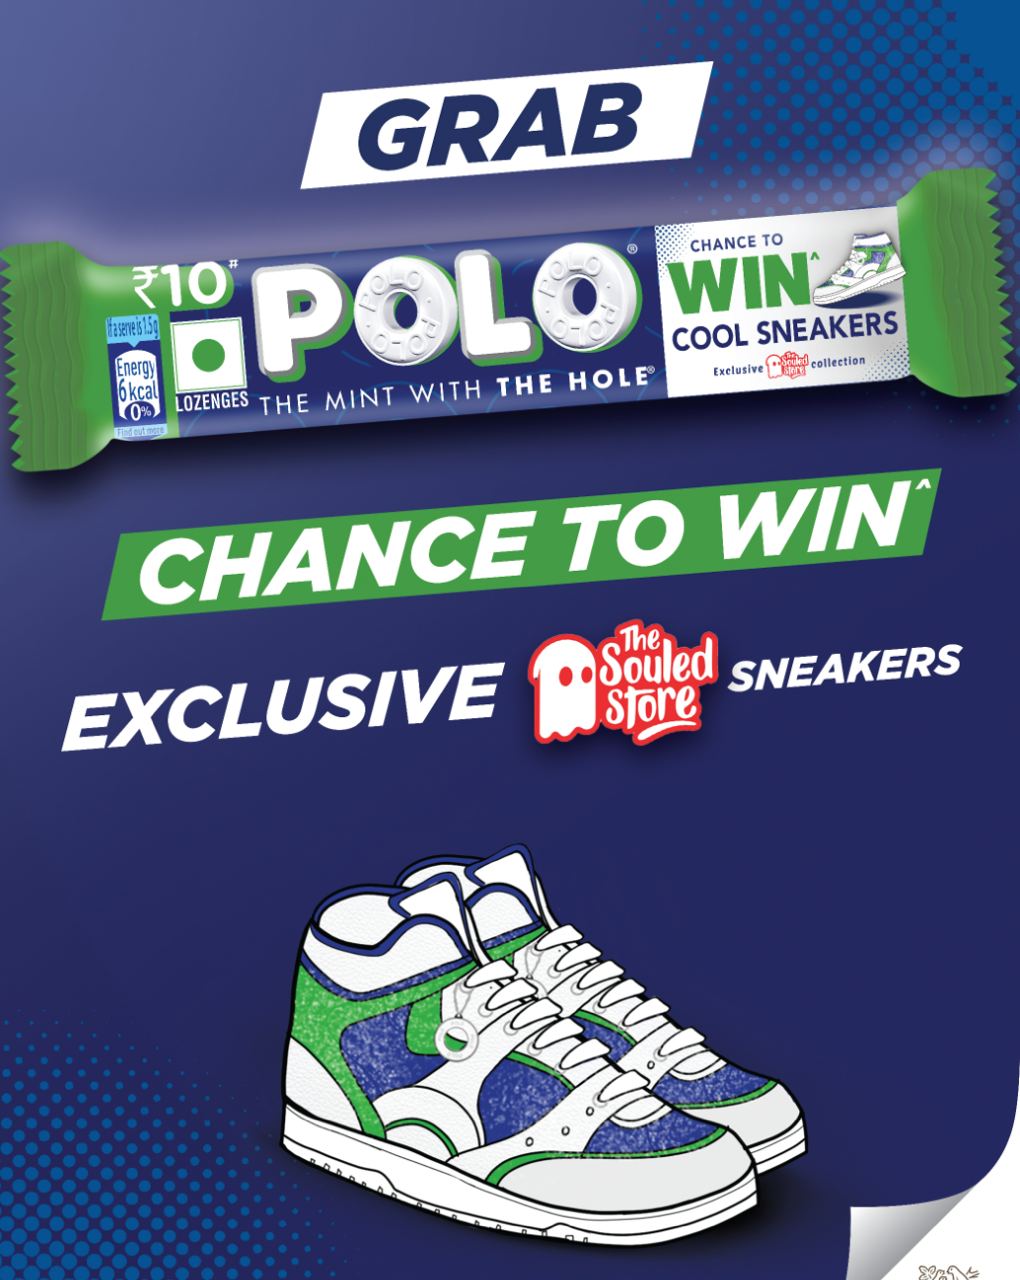 Polo Free Cool Sneakers Offer